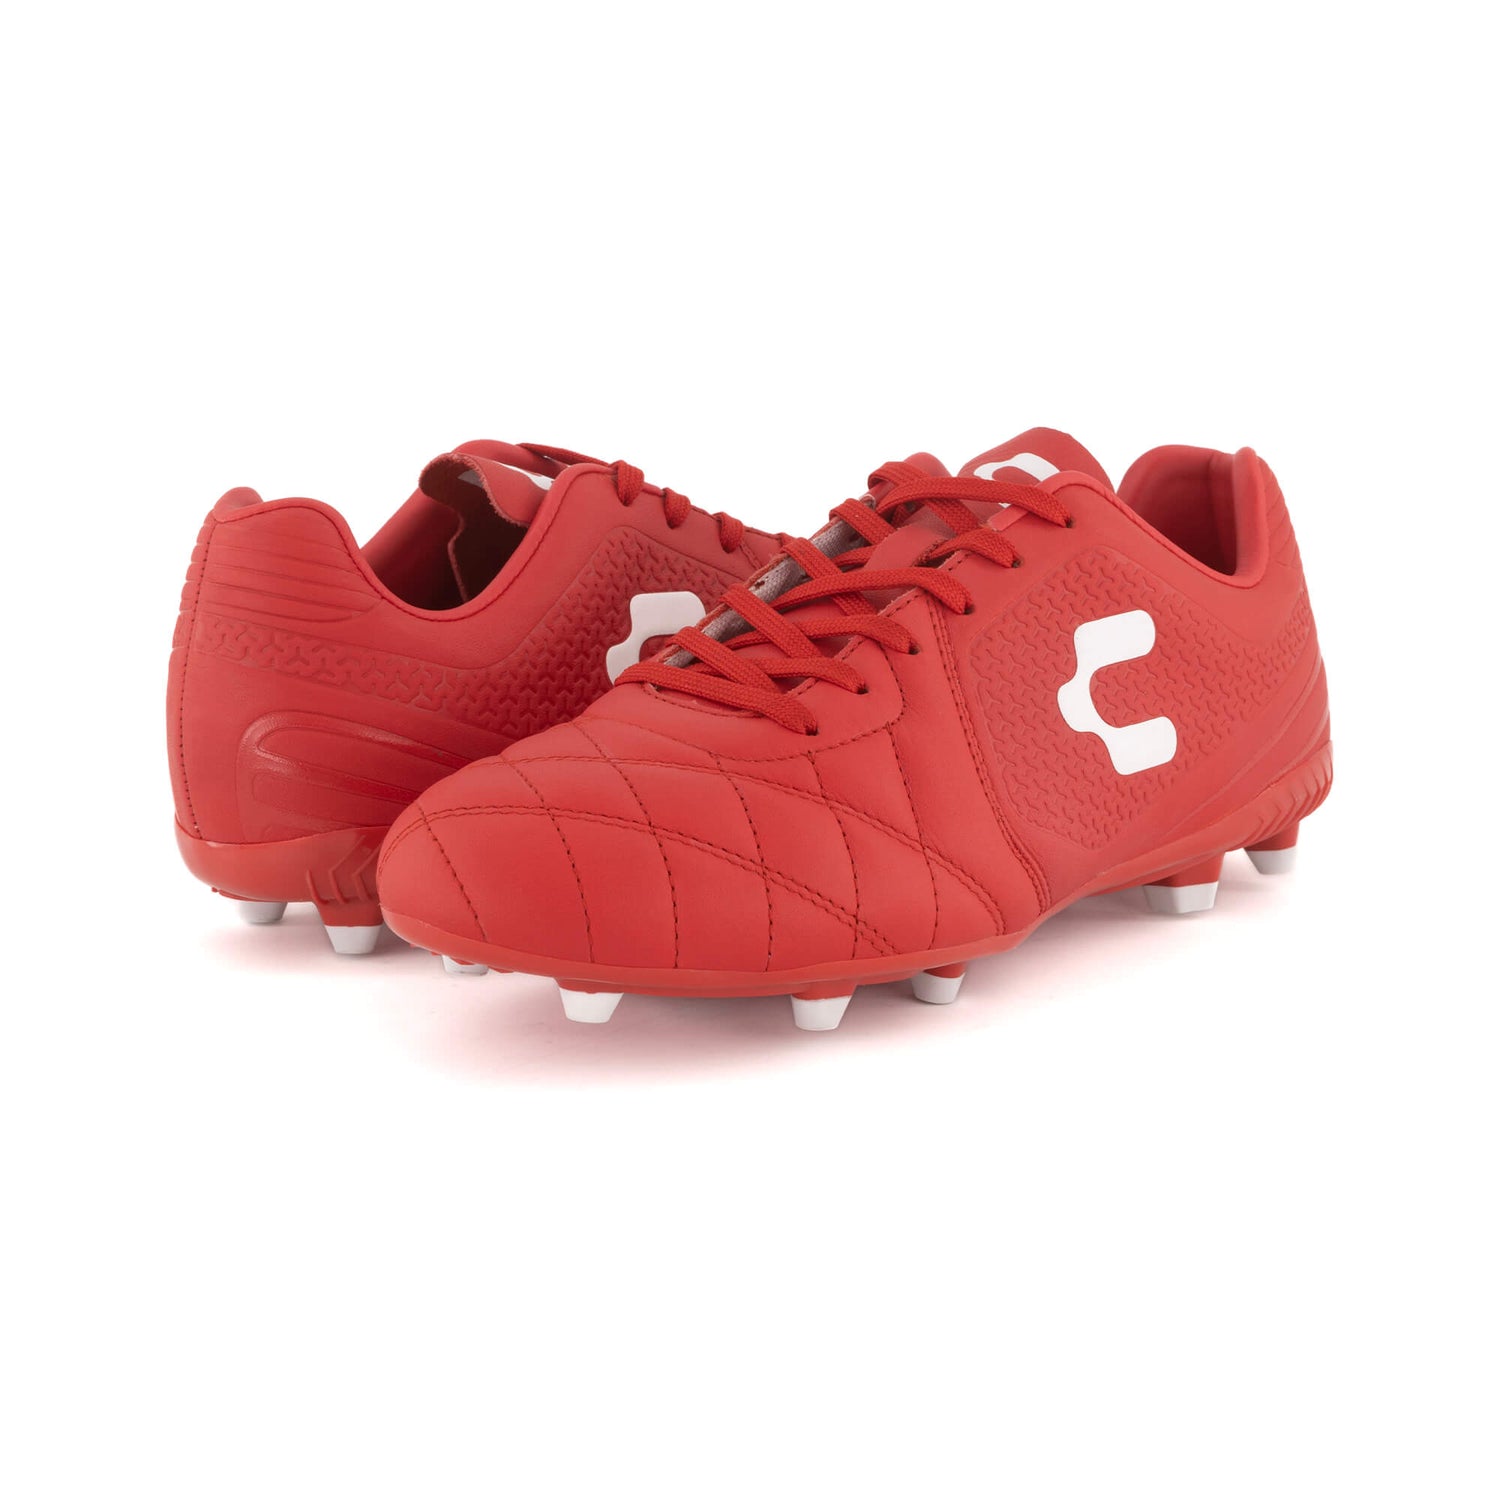 Charly Legendario 2.0 LT - Red (Pair - Lateral Front and Back)